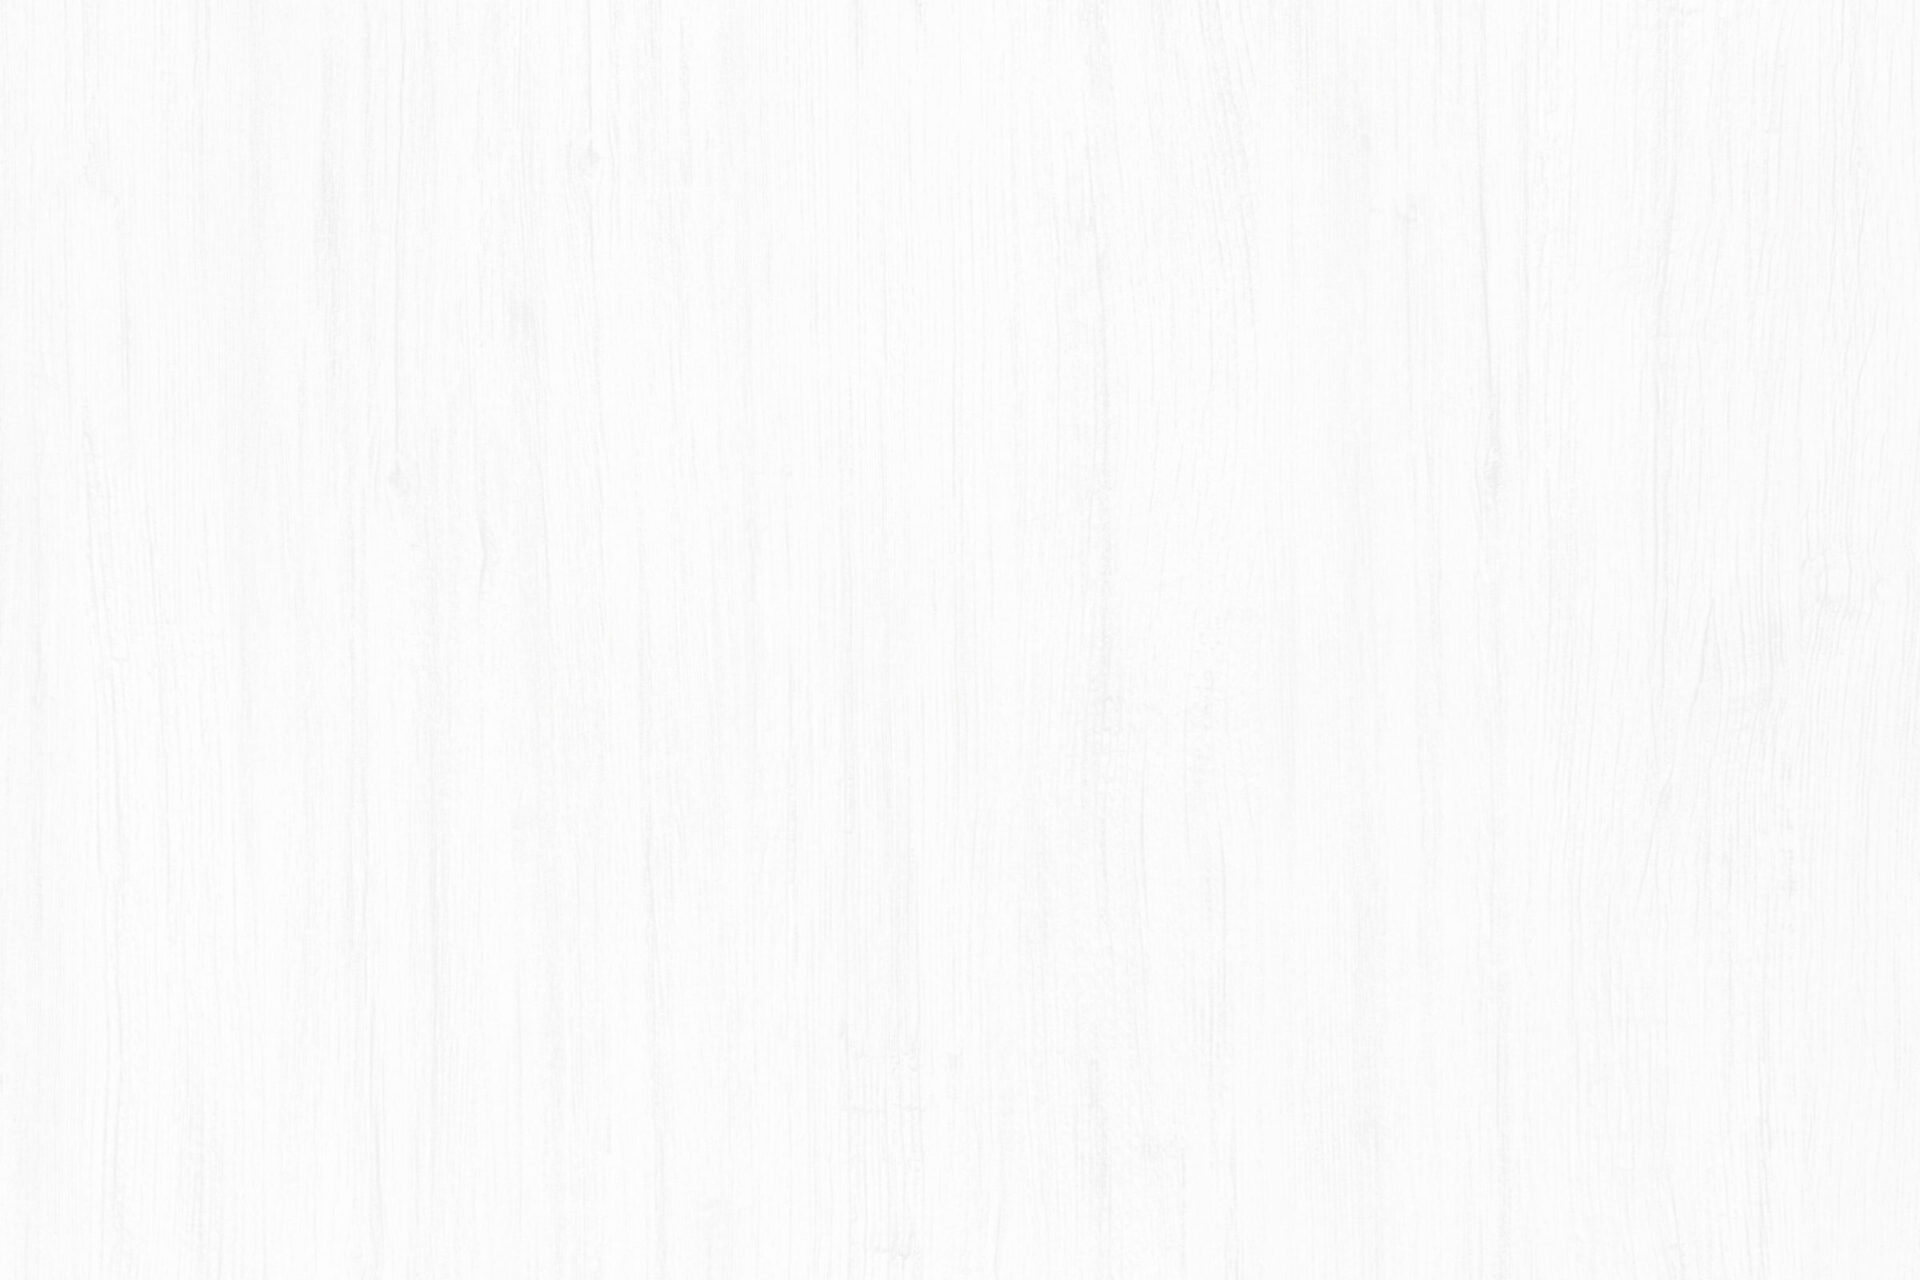 This image shows a plain, white wooden texture with vertical lines indicating wood grain. It has a minimalist, clean, and simple design.